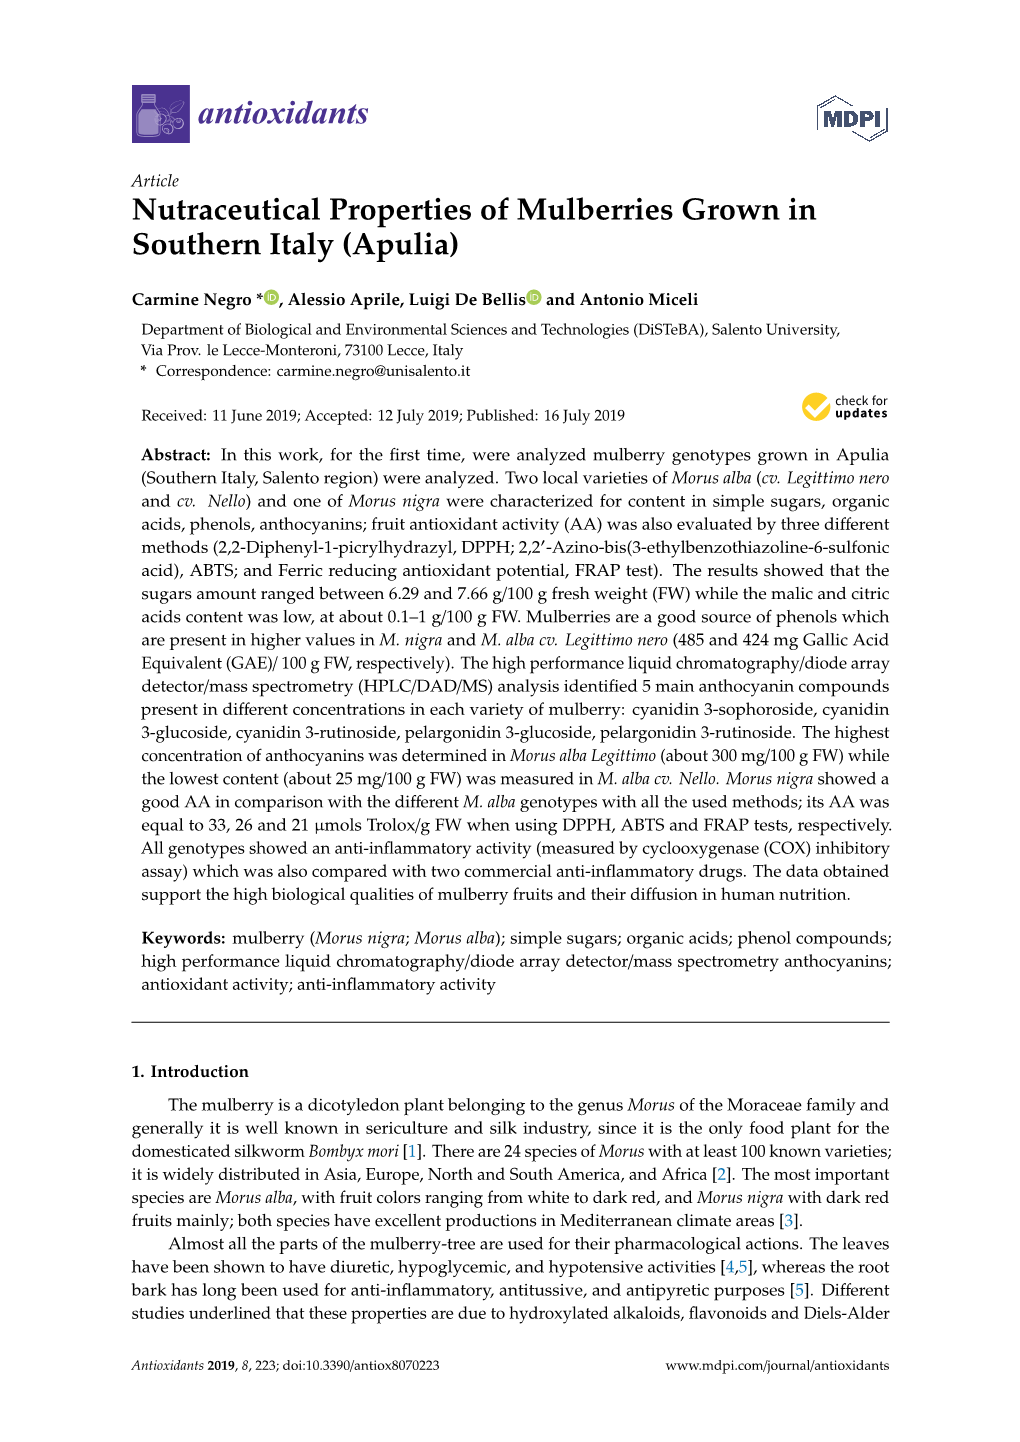 Nutraceutical Properties of Mulberries Grown in Southern Italy (Apulia)